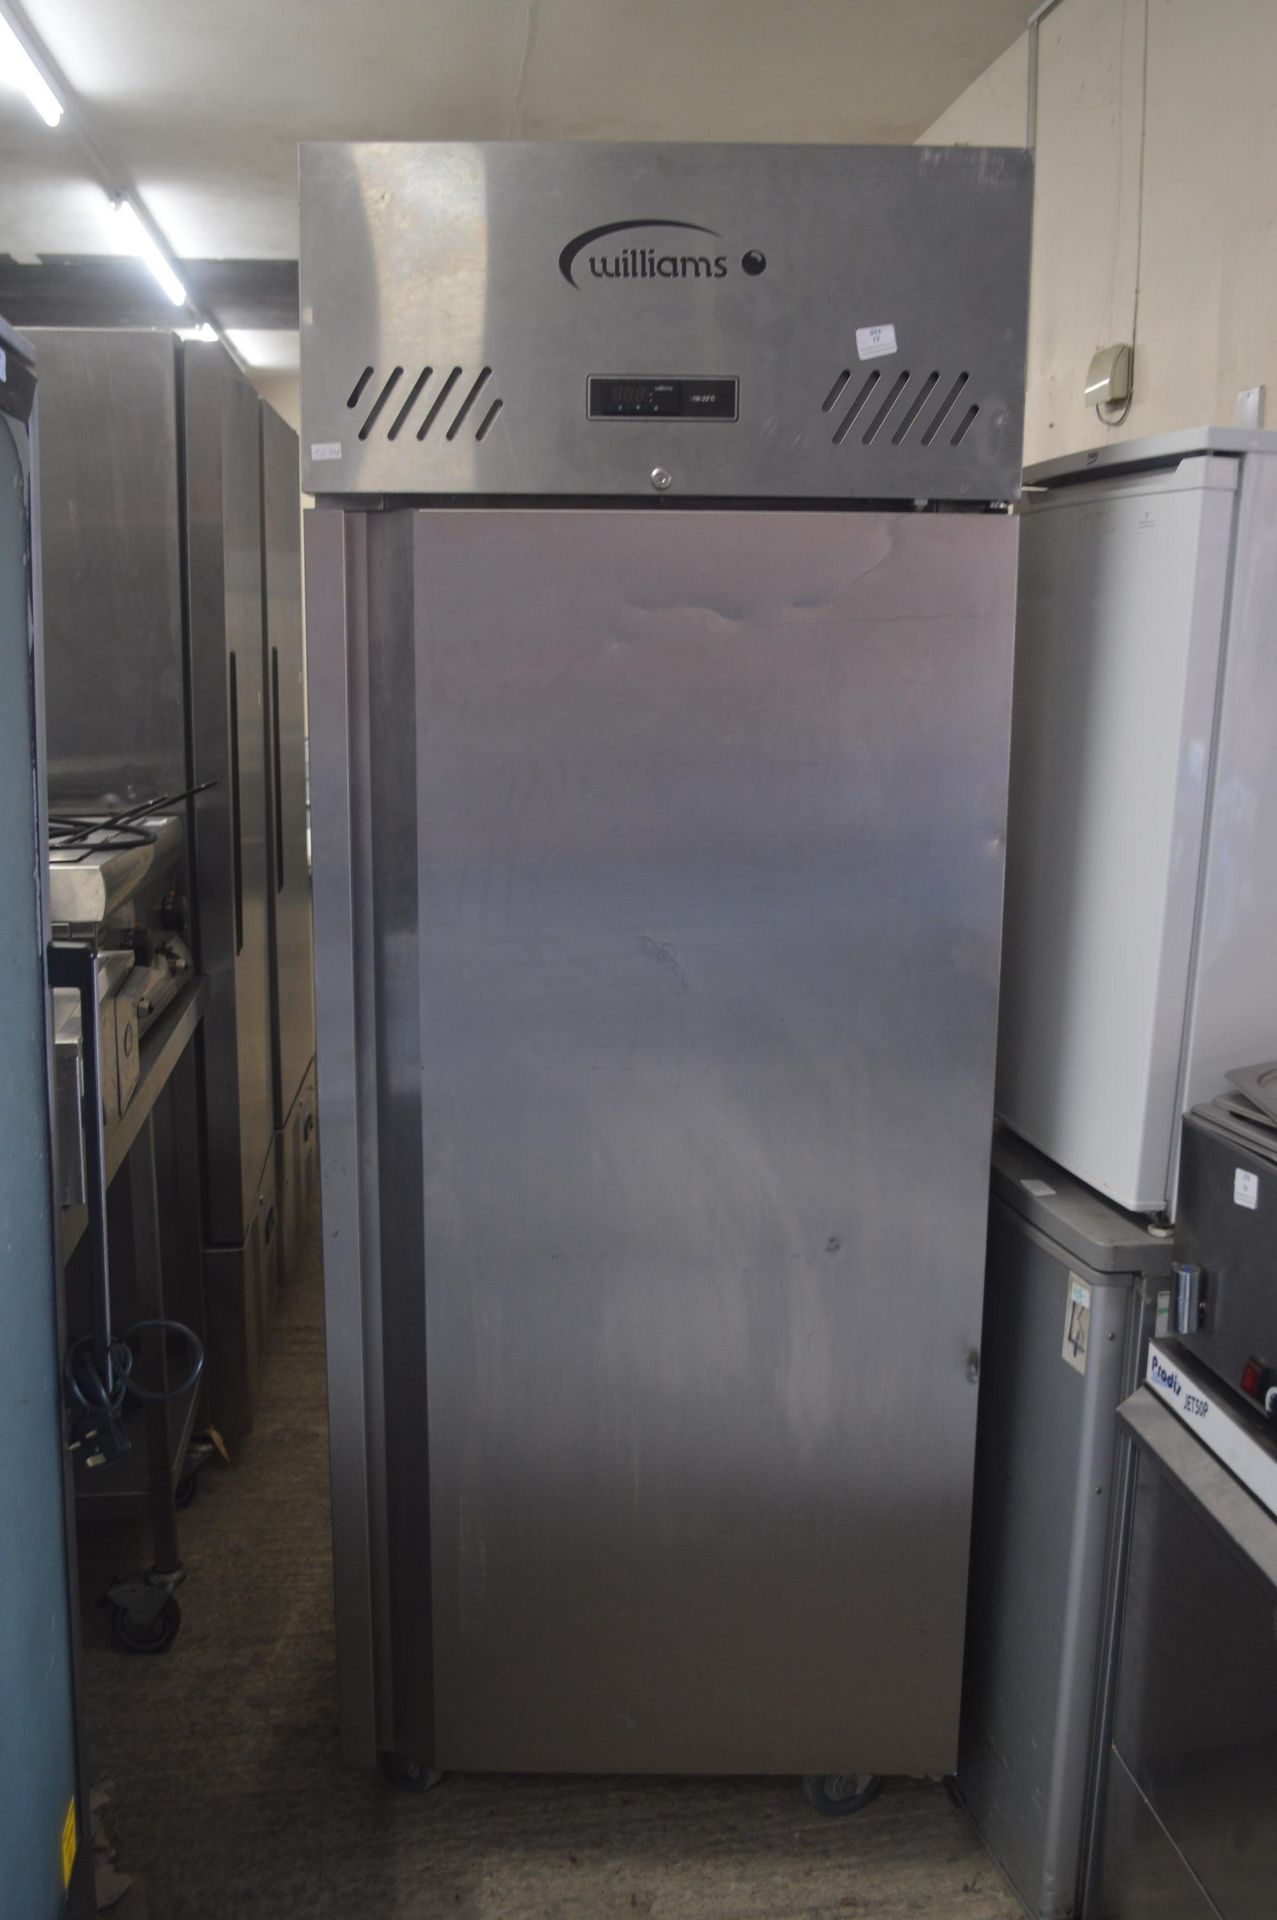 *Williams Stainless Steel Upright Refrigerator - Image 2 of 3